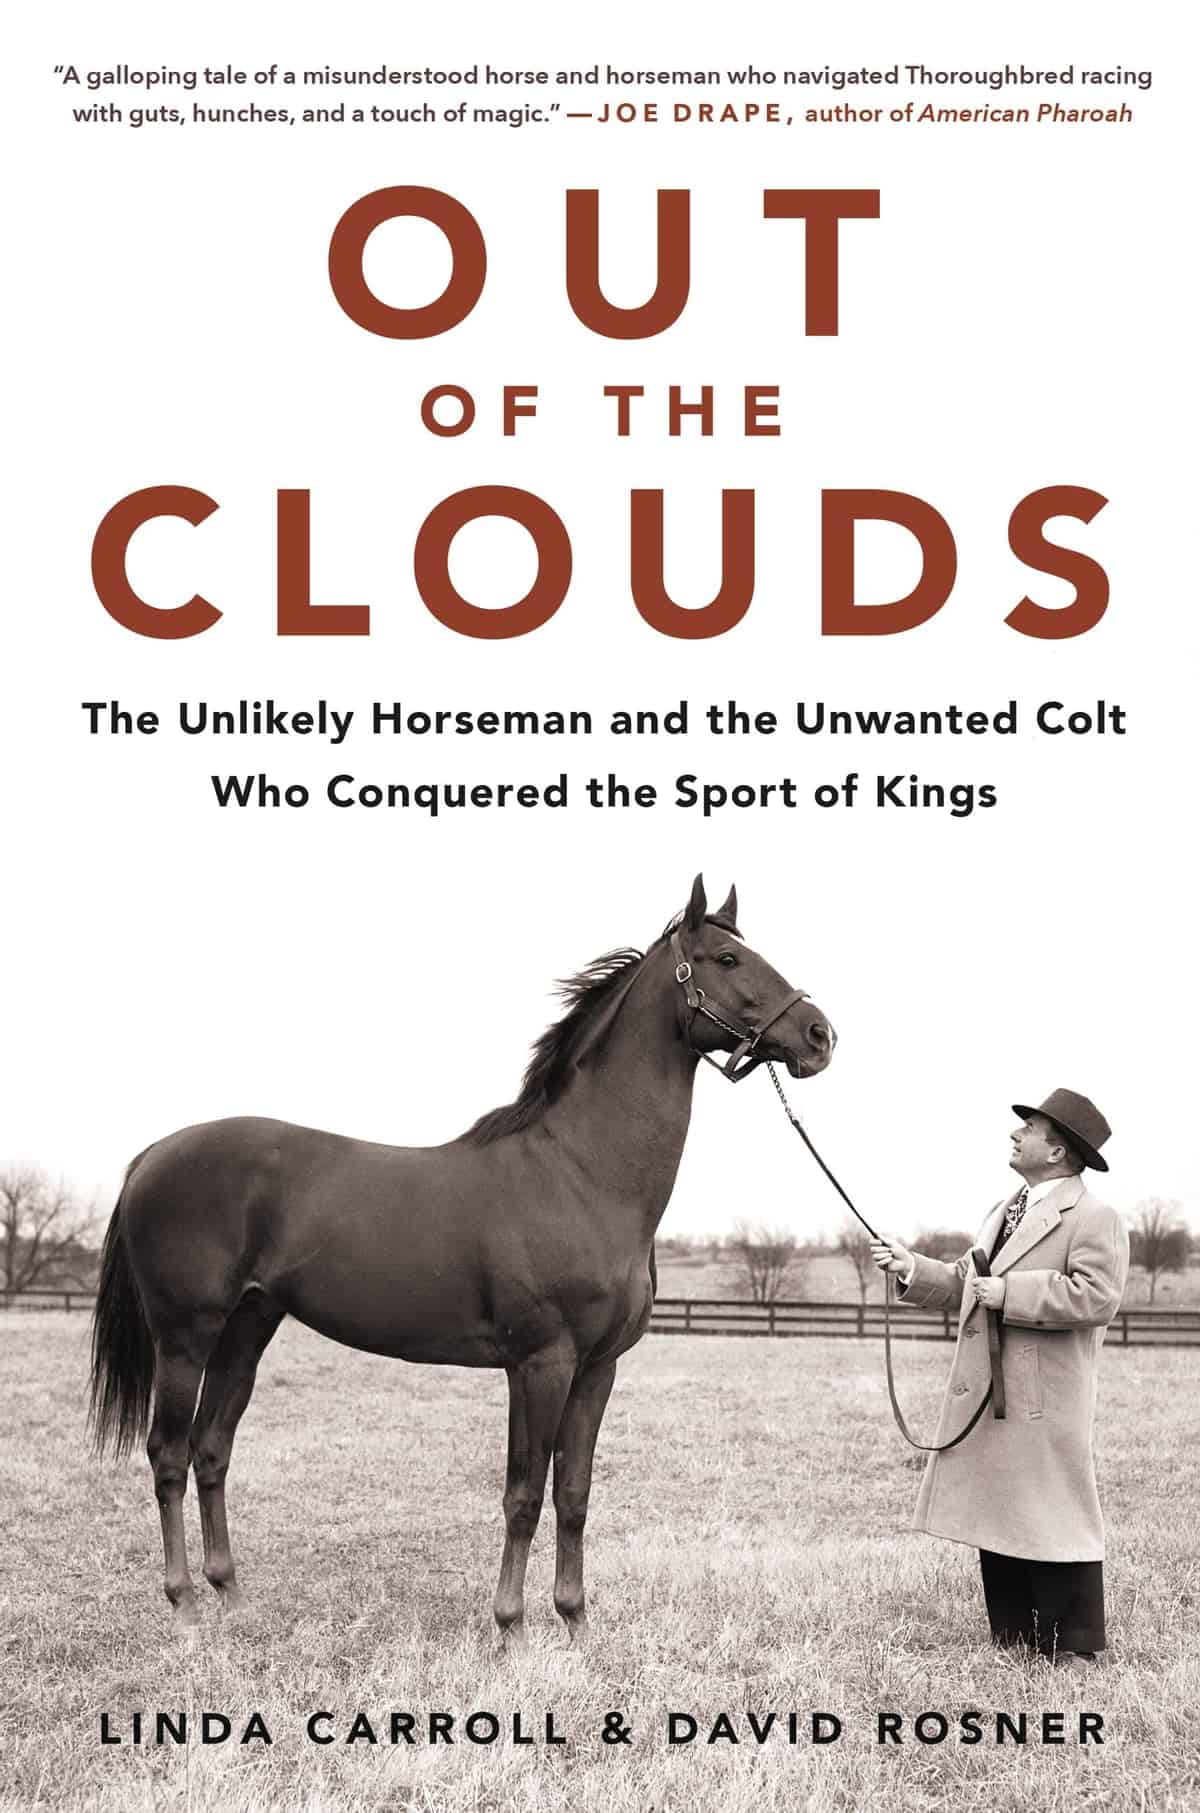 Out of the Clouds by Linda Carroll and David Rosner